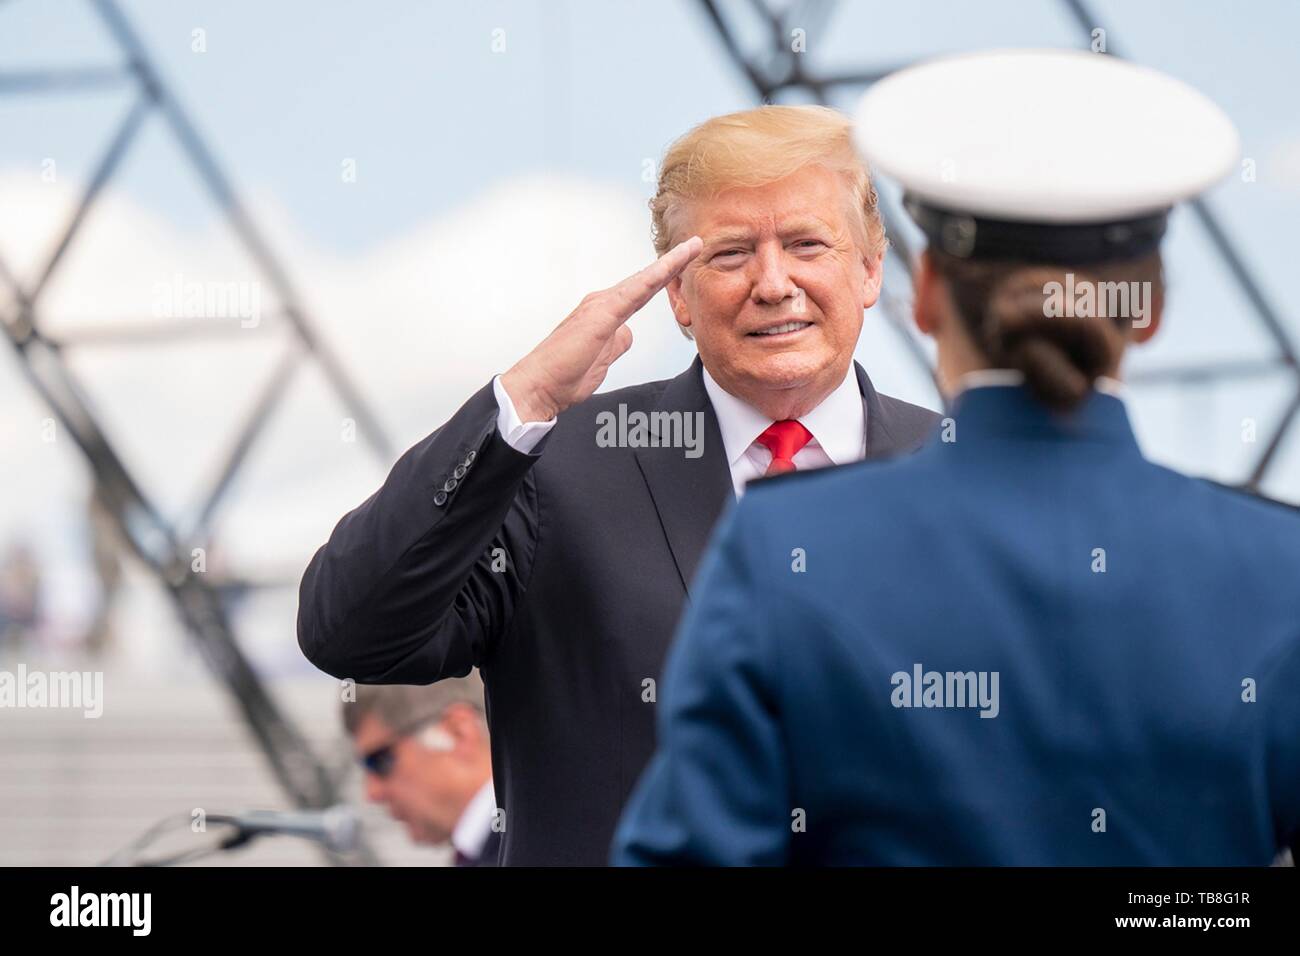 U.S President Donald Trump congratulates cadets during the U.S. Air Force Academy Graduation Ceremony at the USAF Academy Falcon Stadium May 30, 2019 in Colorado Springs, Colorado. Credit: Planetpix/Alamy Live News Stock Photo